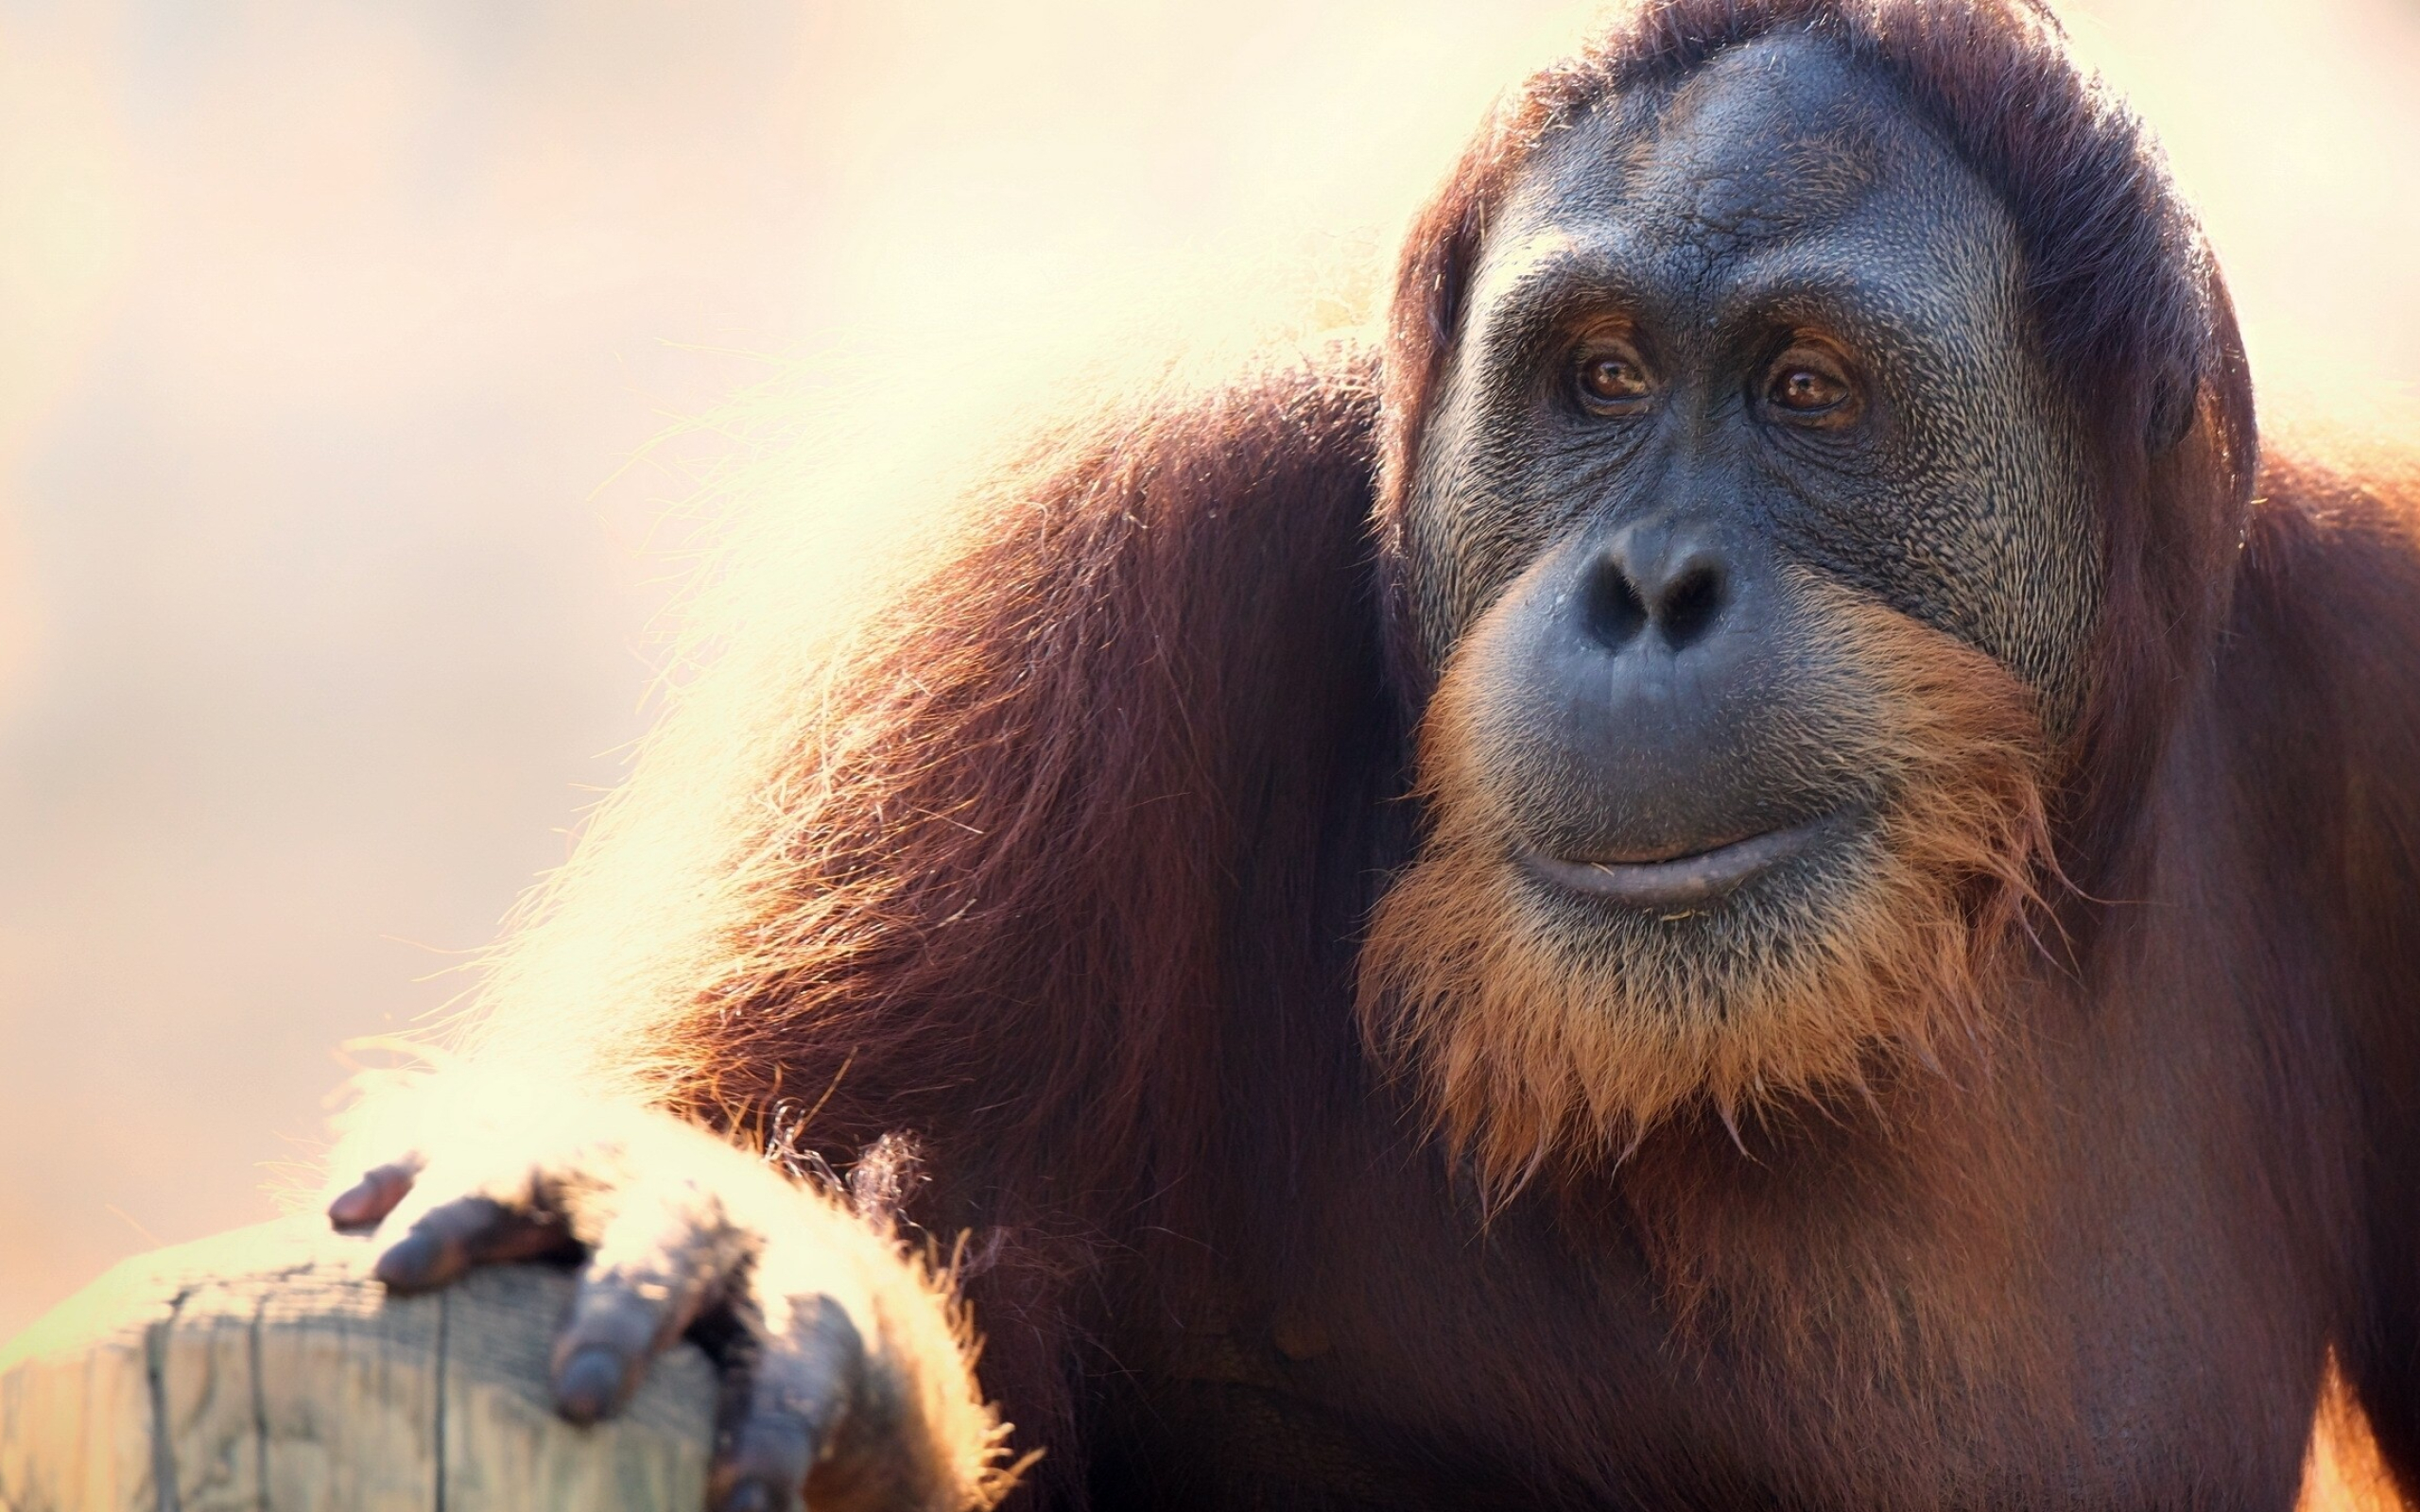 Ape: Orangutan, The largest arboreal mammal that spends most of its time in trees. 2560x1600 HD Background.